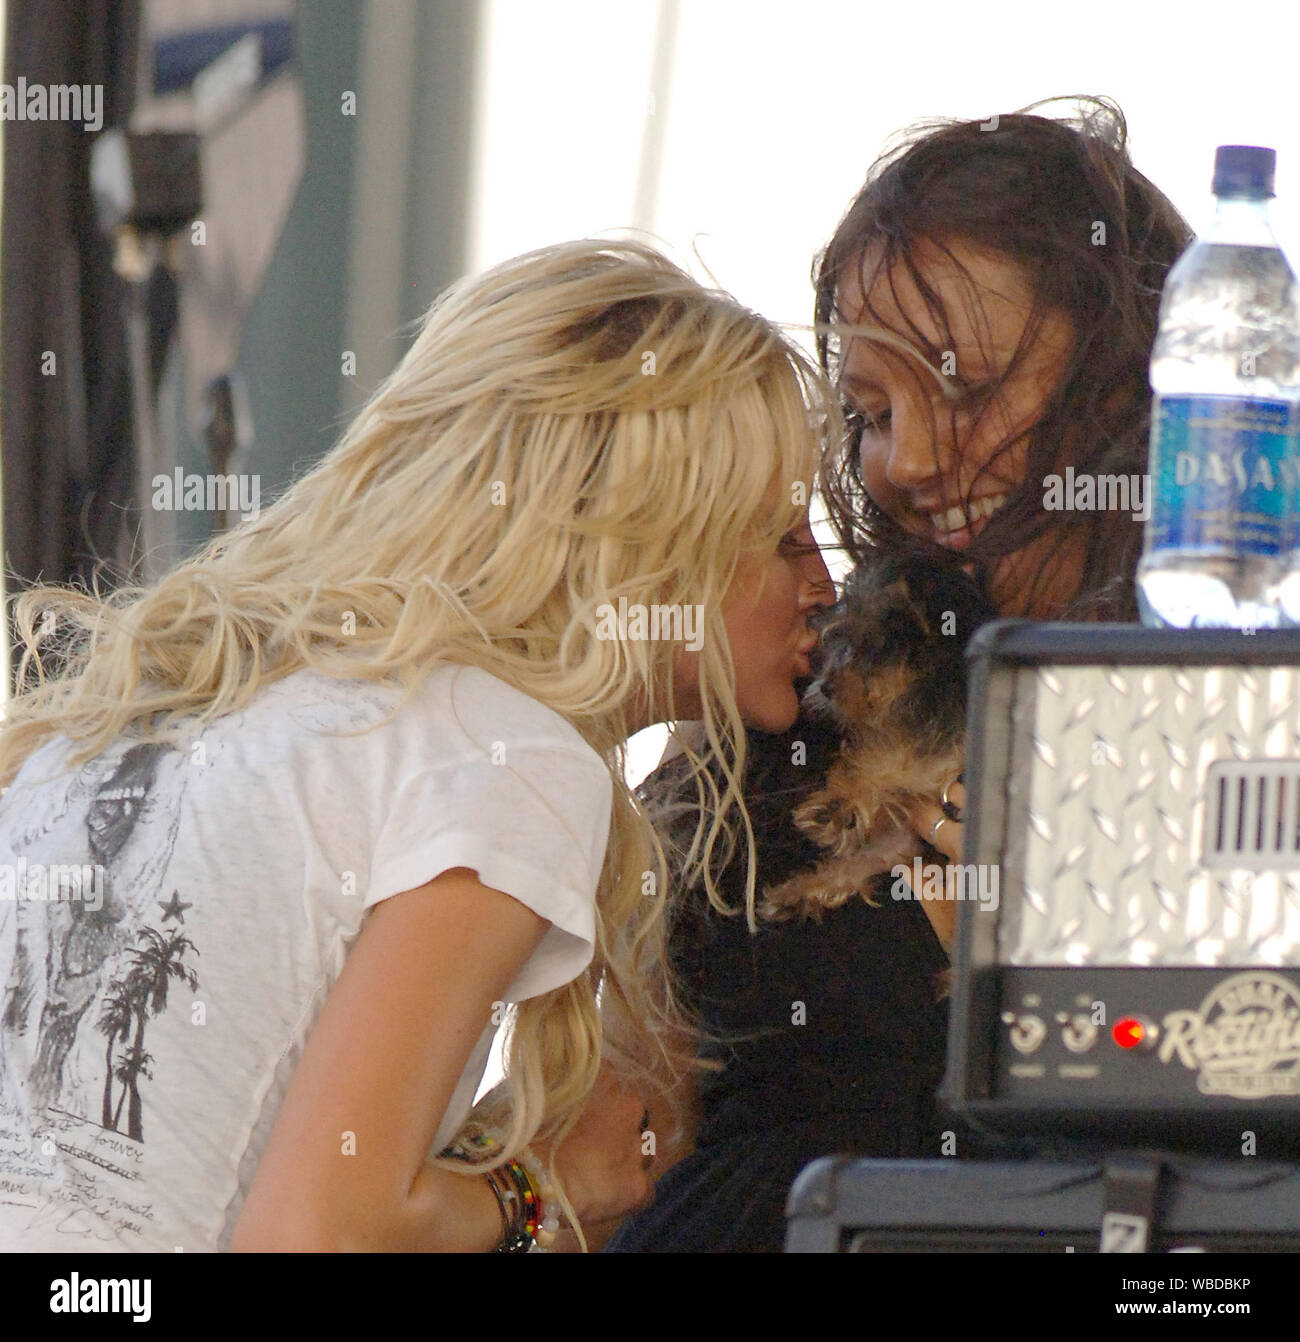 WEST PALM BEACH, FL - MAY 06, 2006:  Ashlee Simpson with her new dog Hula rocks SunFest 2006. With her new dog, new blonde extensions, along with a  brand new nose (Early on April 21, a source says, Ashlee, 21, arrived at the office of famed Beverly Hills plastic surgeon Dr. Raj Kanodia with her parents, Joe and Tina, for a nose job) It seems younger sis Ashlee's recent nose job makes her look more like her big sis, Jessica. It's the latest move in a makeover that's seen Ashlee go from dark-haired, ratty rocker to sophisticated blonde. Apparently not everyone is happy with Ashlee's new look. I Stock Photo